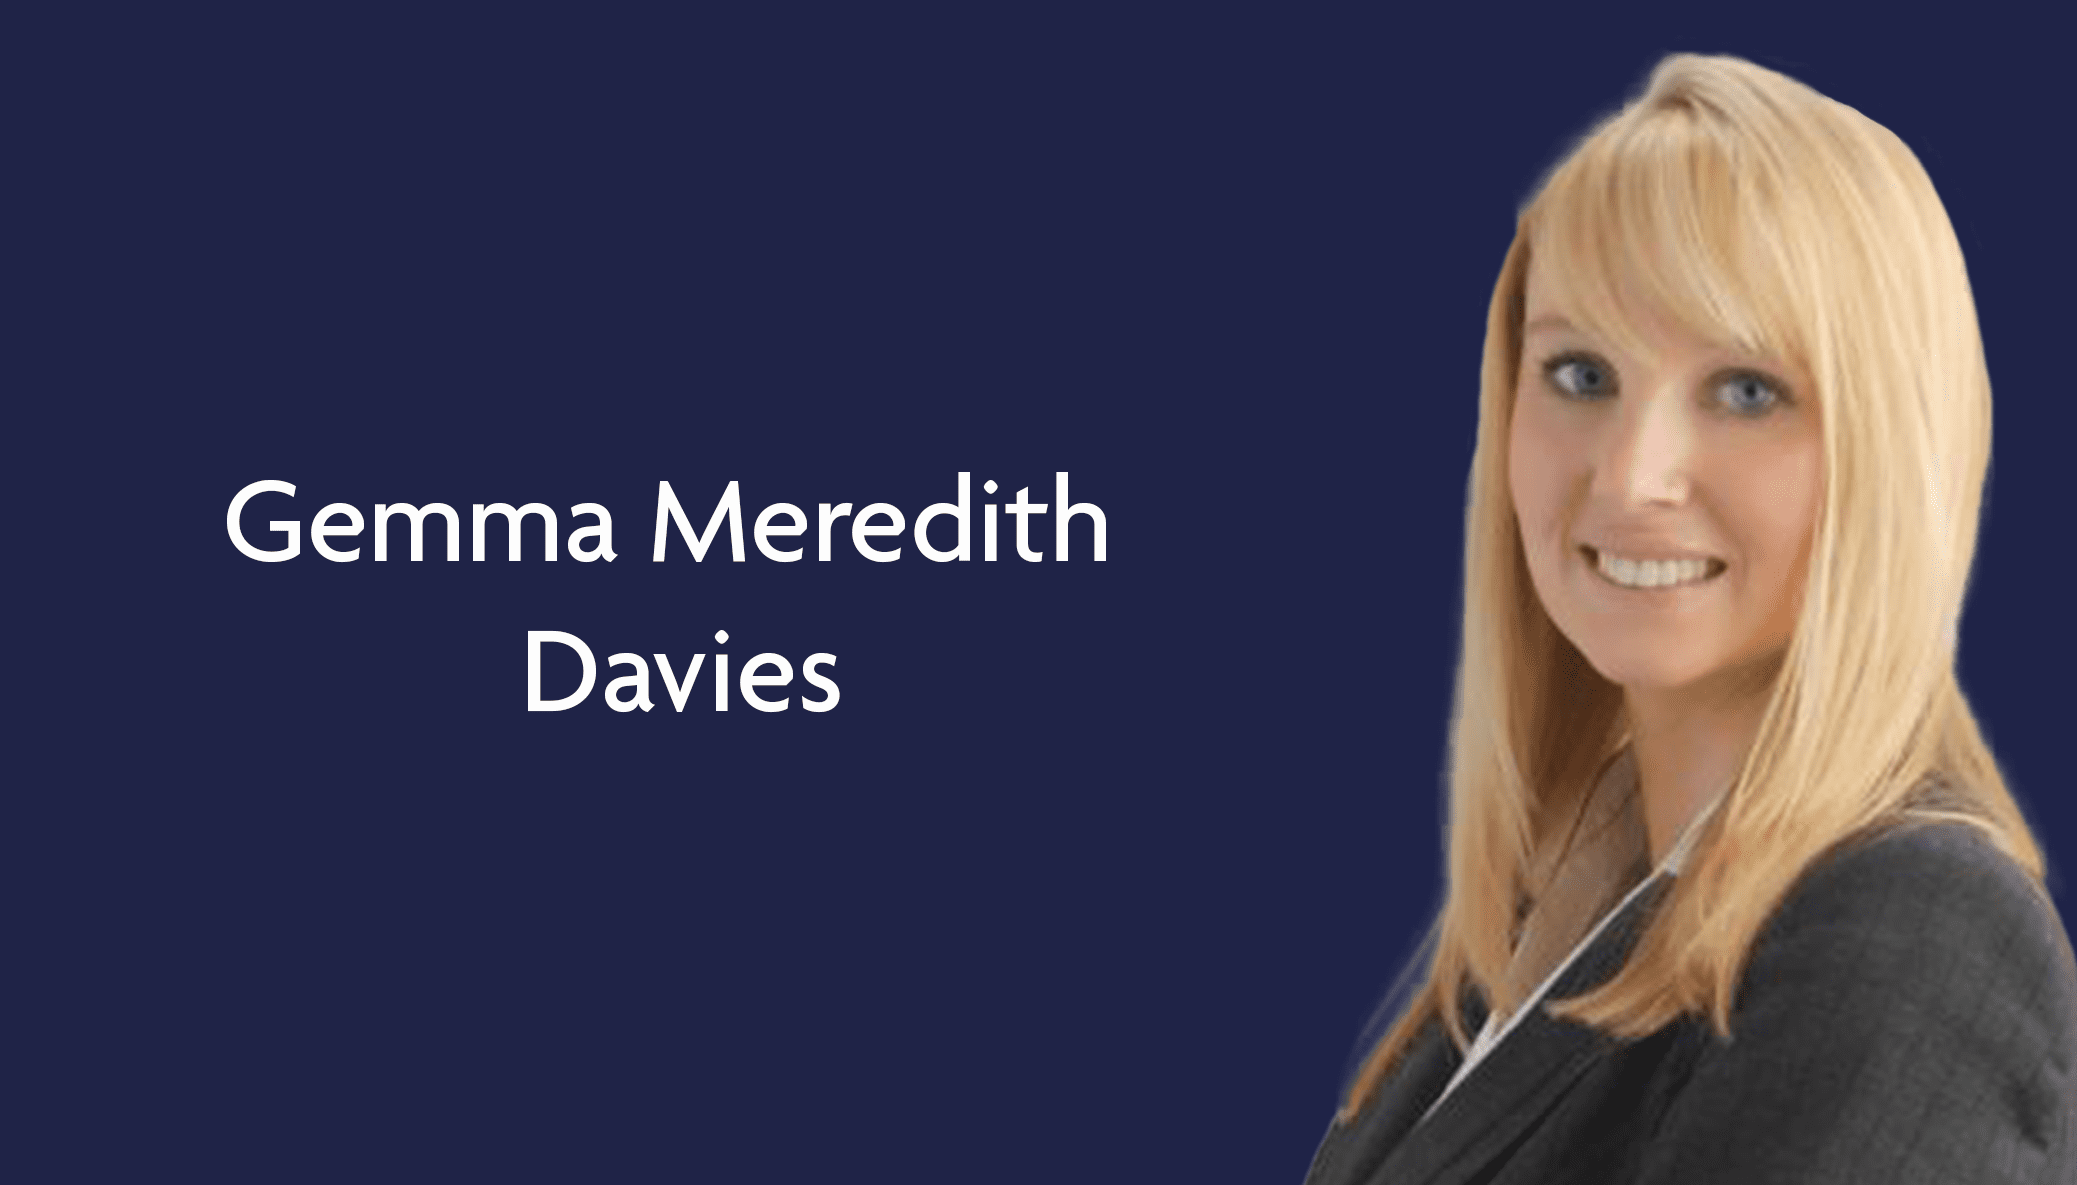 Gemma Meredith-Davies appointed as a Deputy District Judge